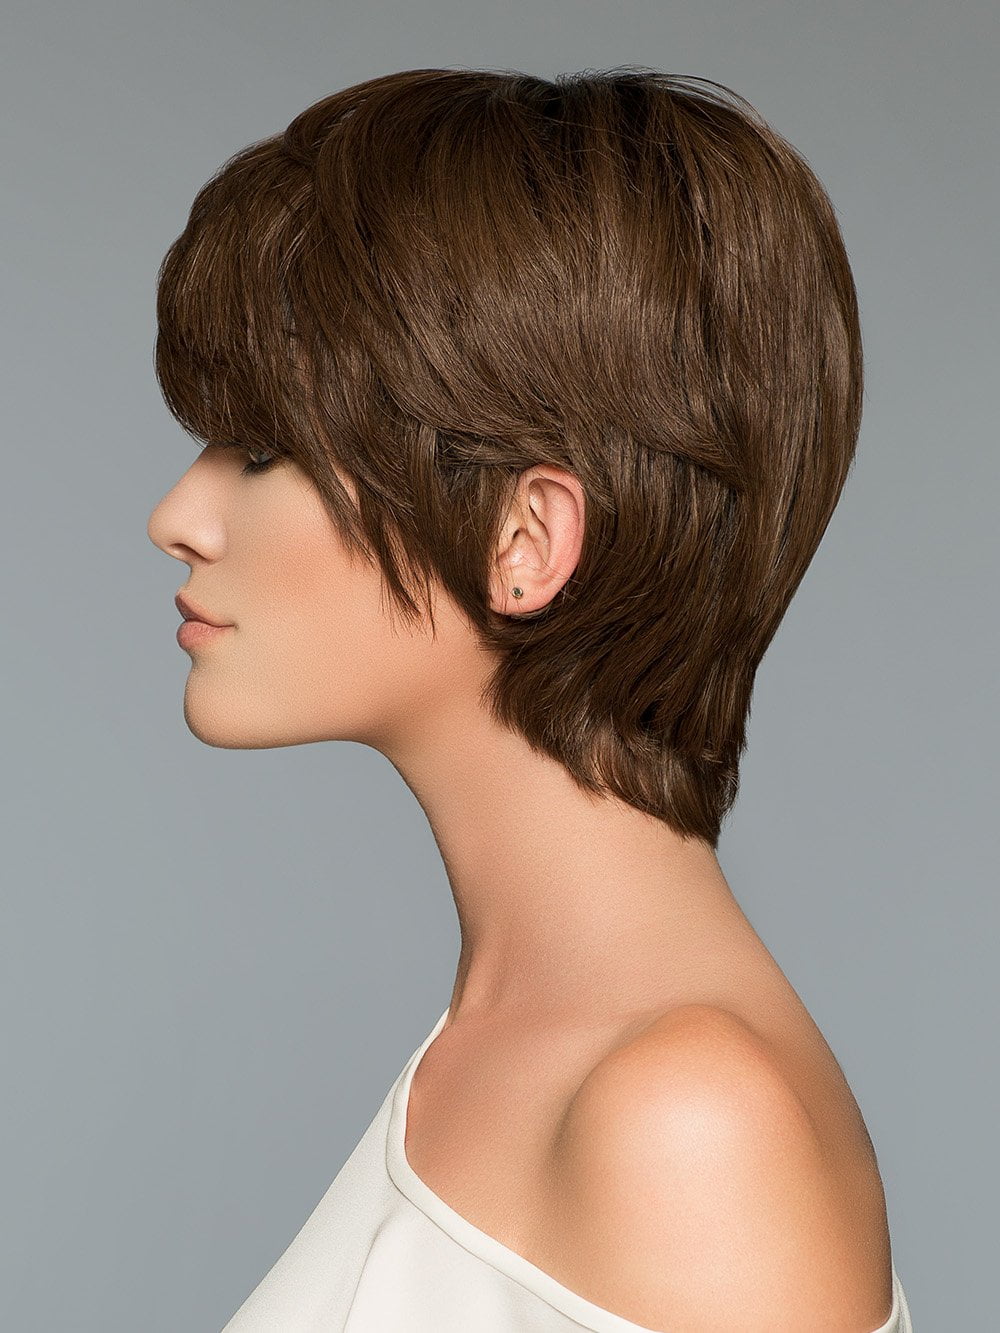 A fun petite pixie wig with loads of layers for multiple styling options.